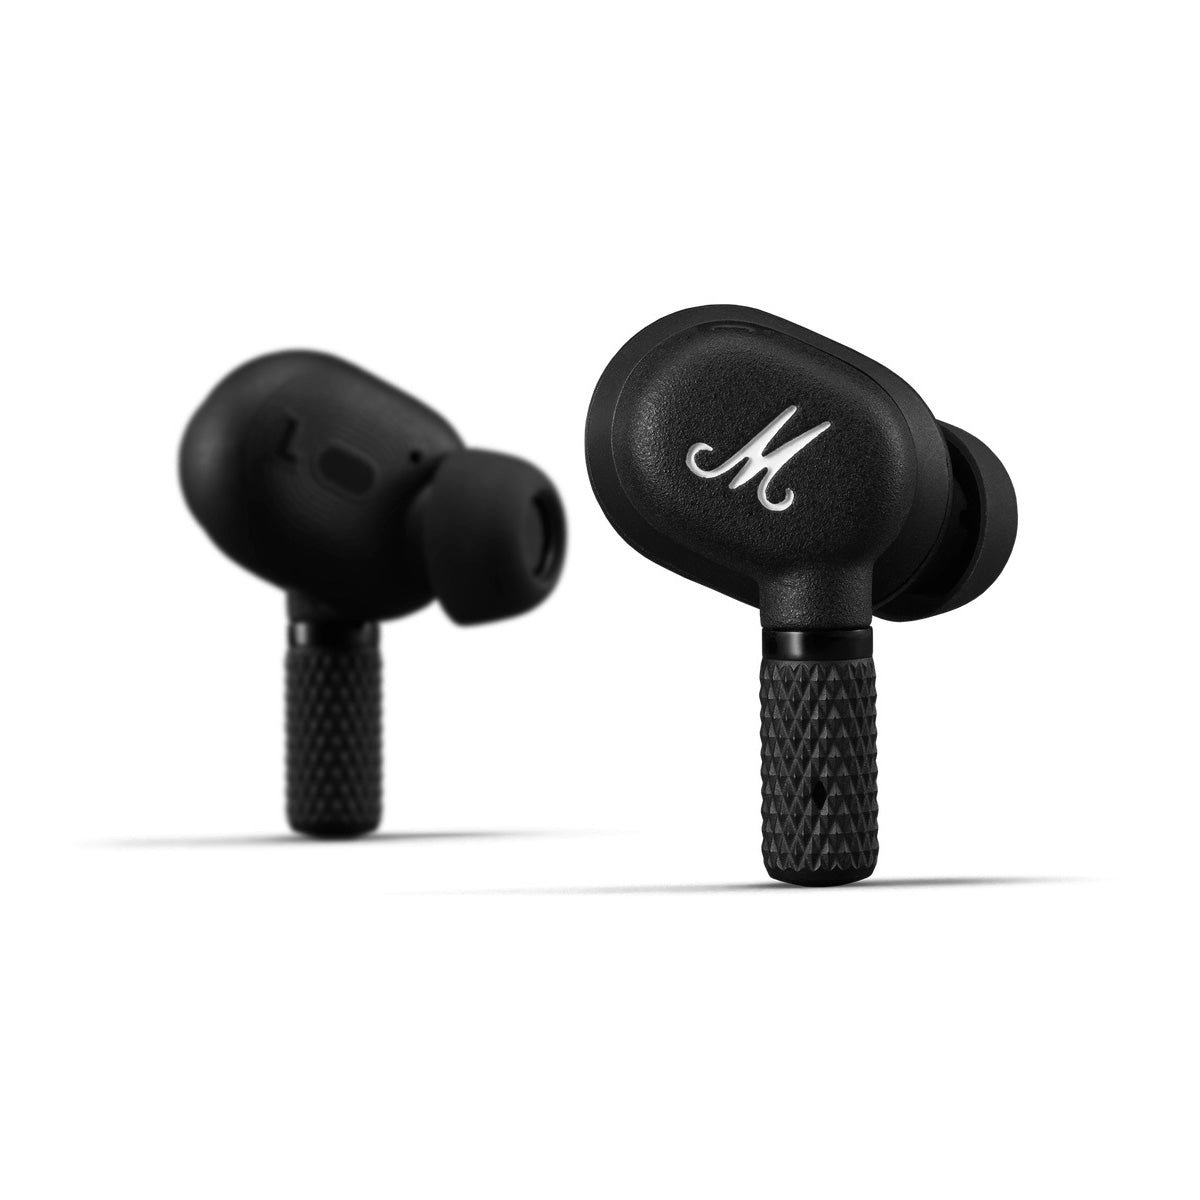 Marshall Motif A.N.C Wireless Earbuds